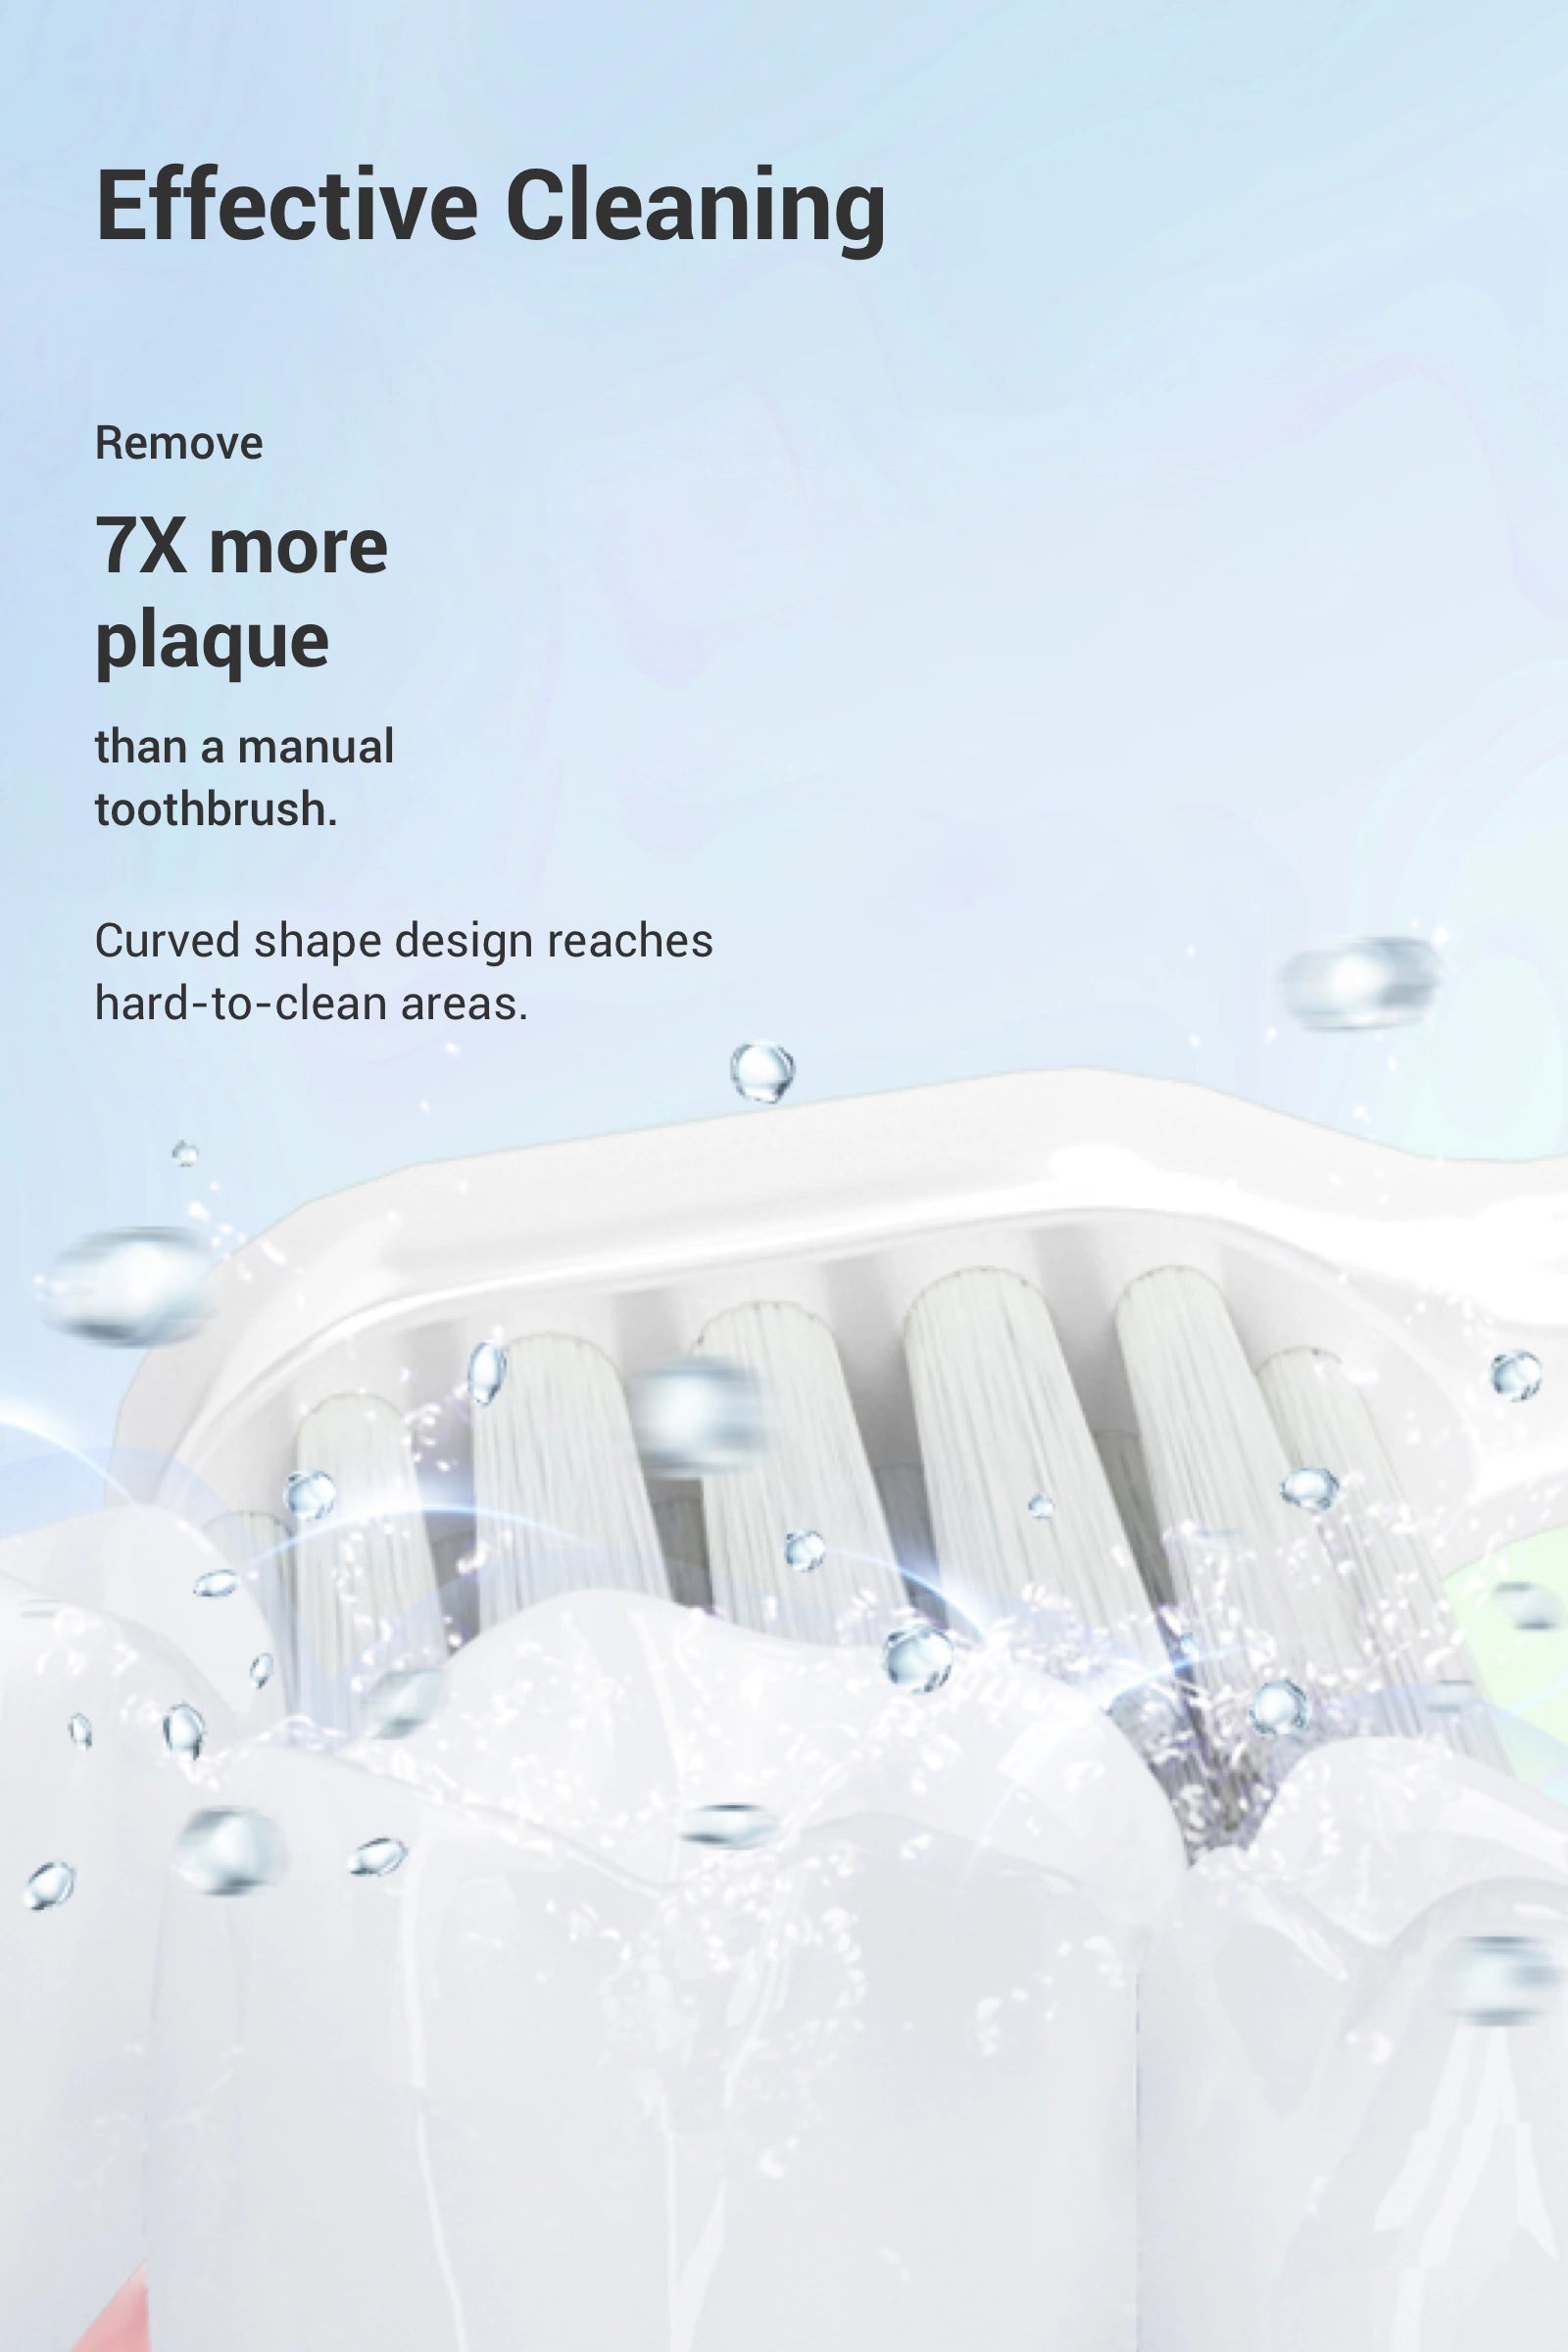 Remove 7X more plaque than a manual toothbrush. Curved shape design reaches hard-to-clean areas.